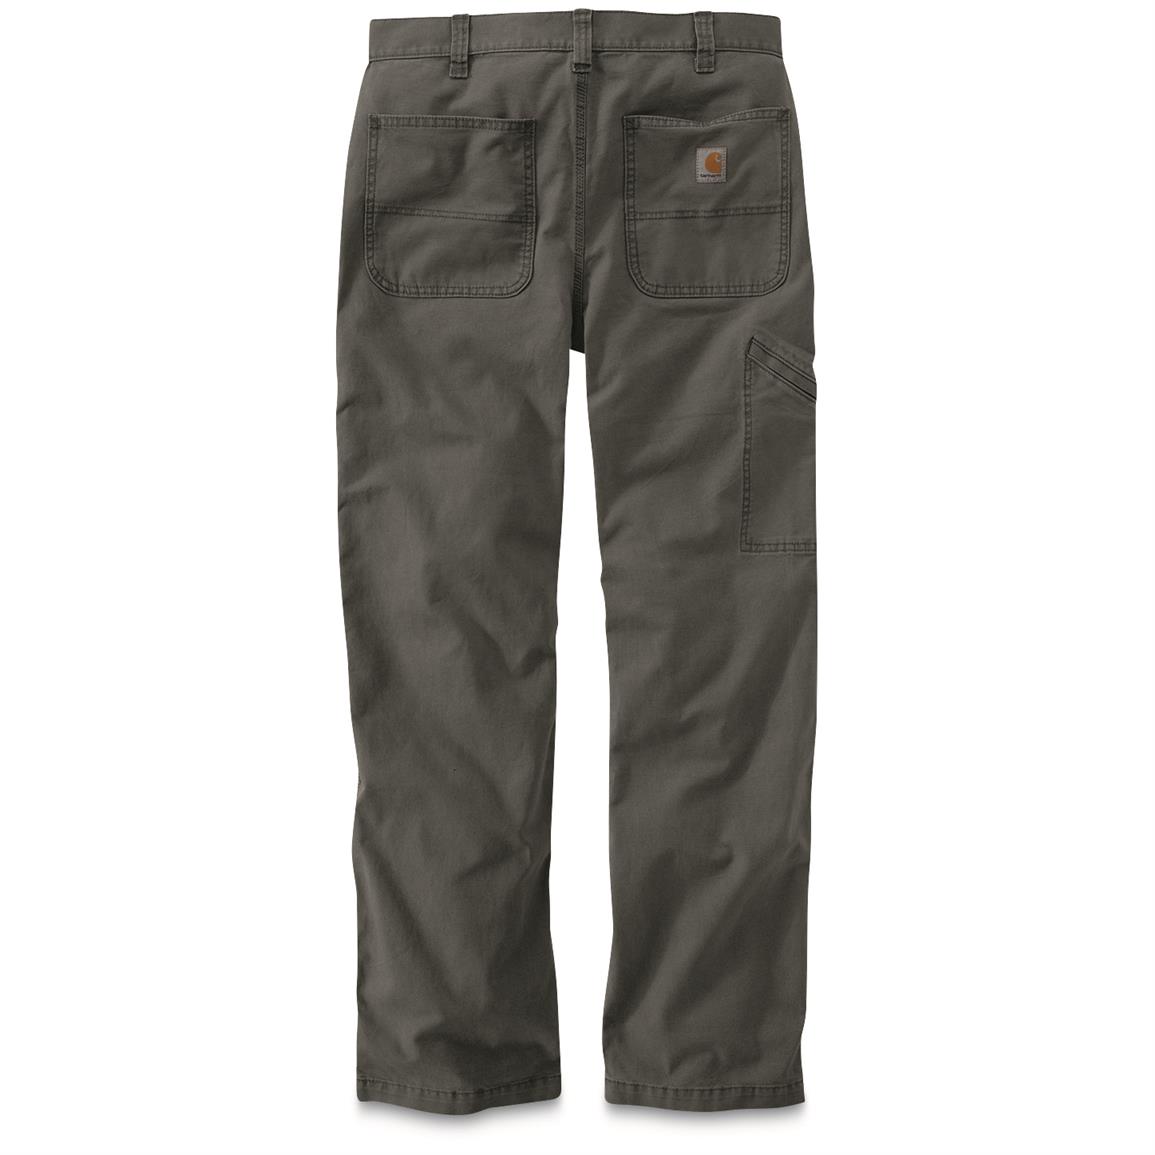 Carhartt Men's Rugged Flex Rigby Dungarees - 677746, Jeans & Pants at ...